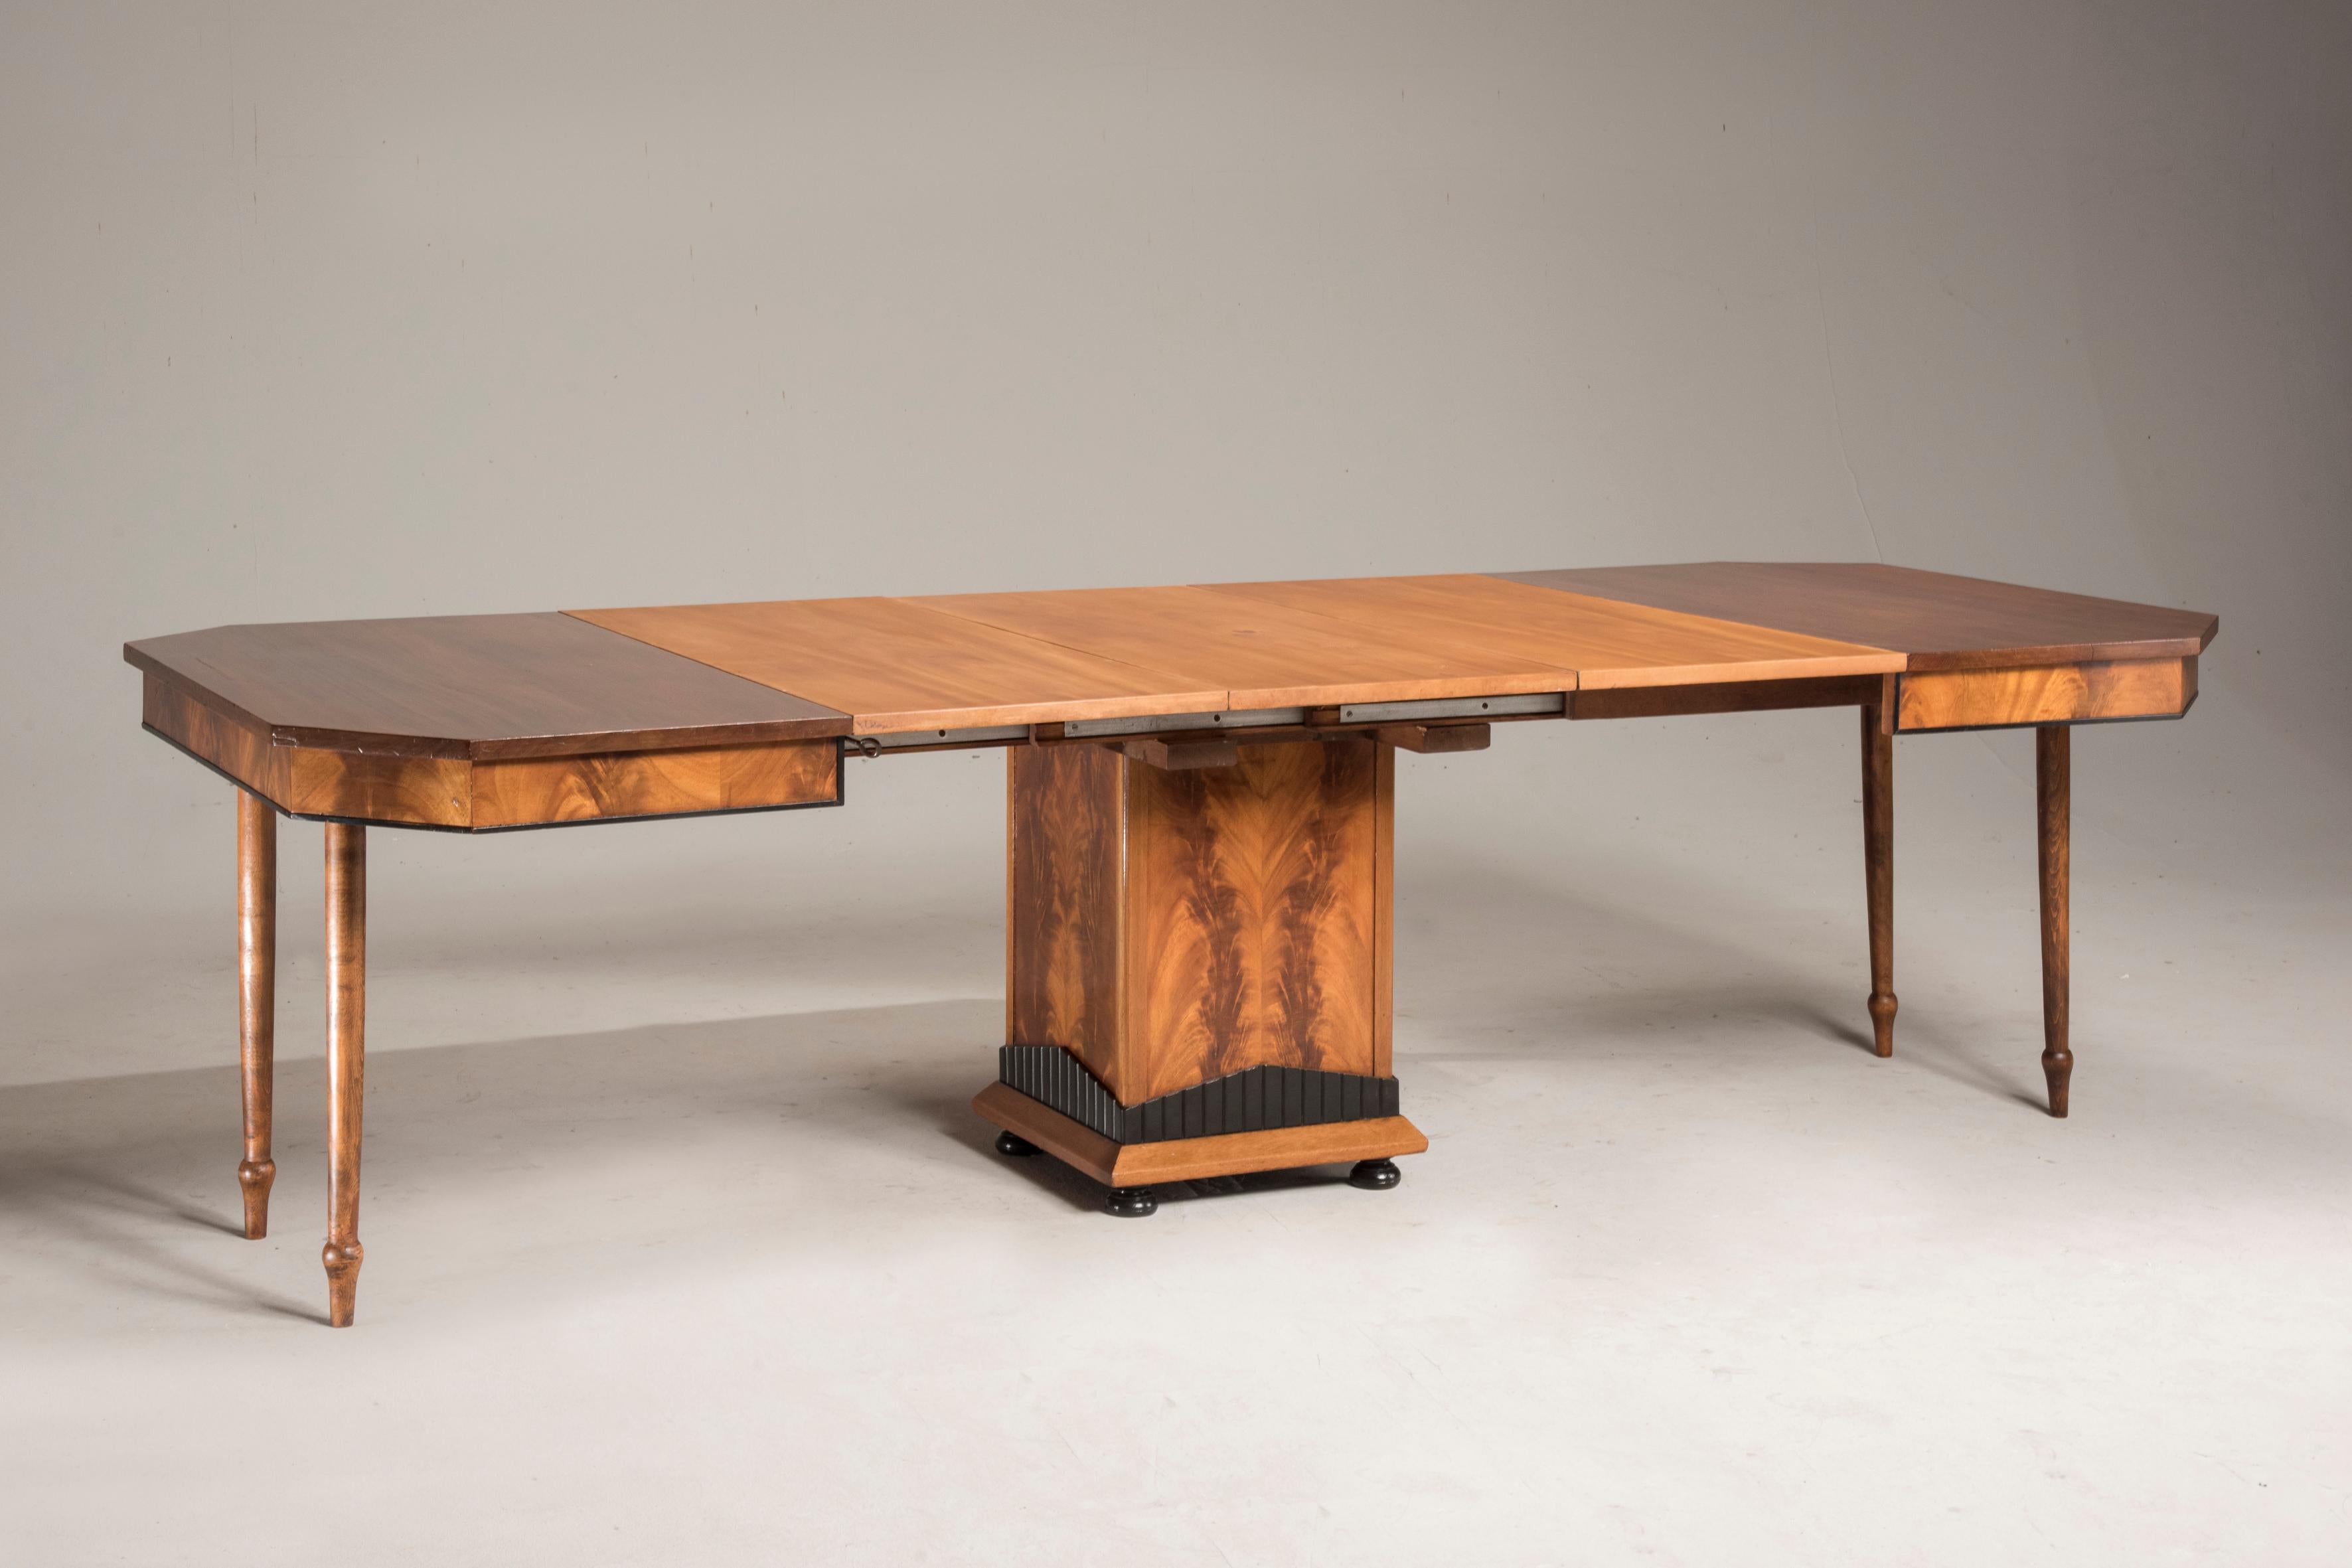 20th Century Art Deco Mahogany Wood Squared Extendable Table Up to 12 Seats For Sale